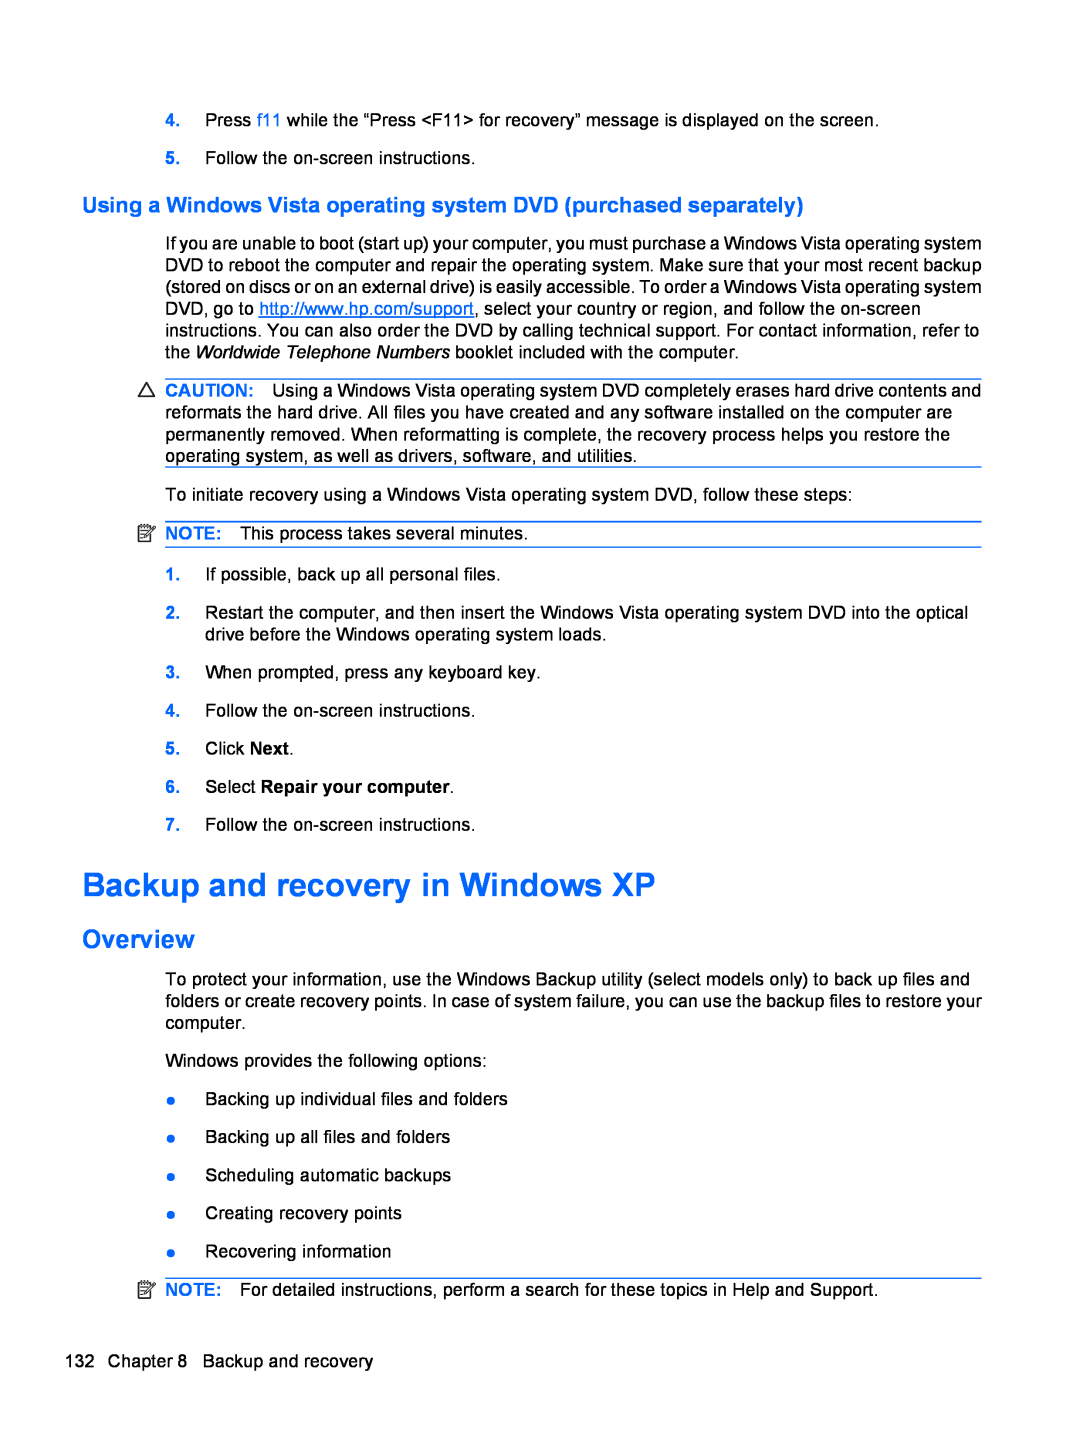 HP FN038UAABA Backup and recovery in Windows XP, Using a Windows Vista operating system DVD purchased separately, Overview 